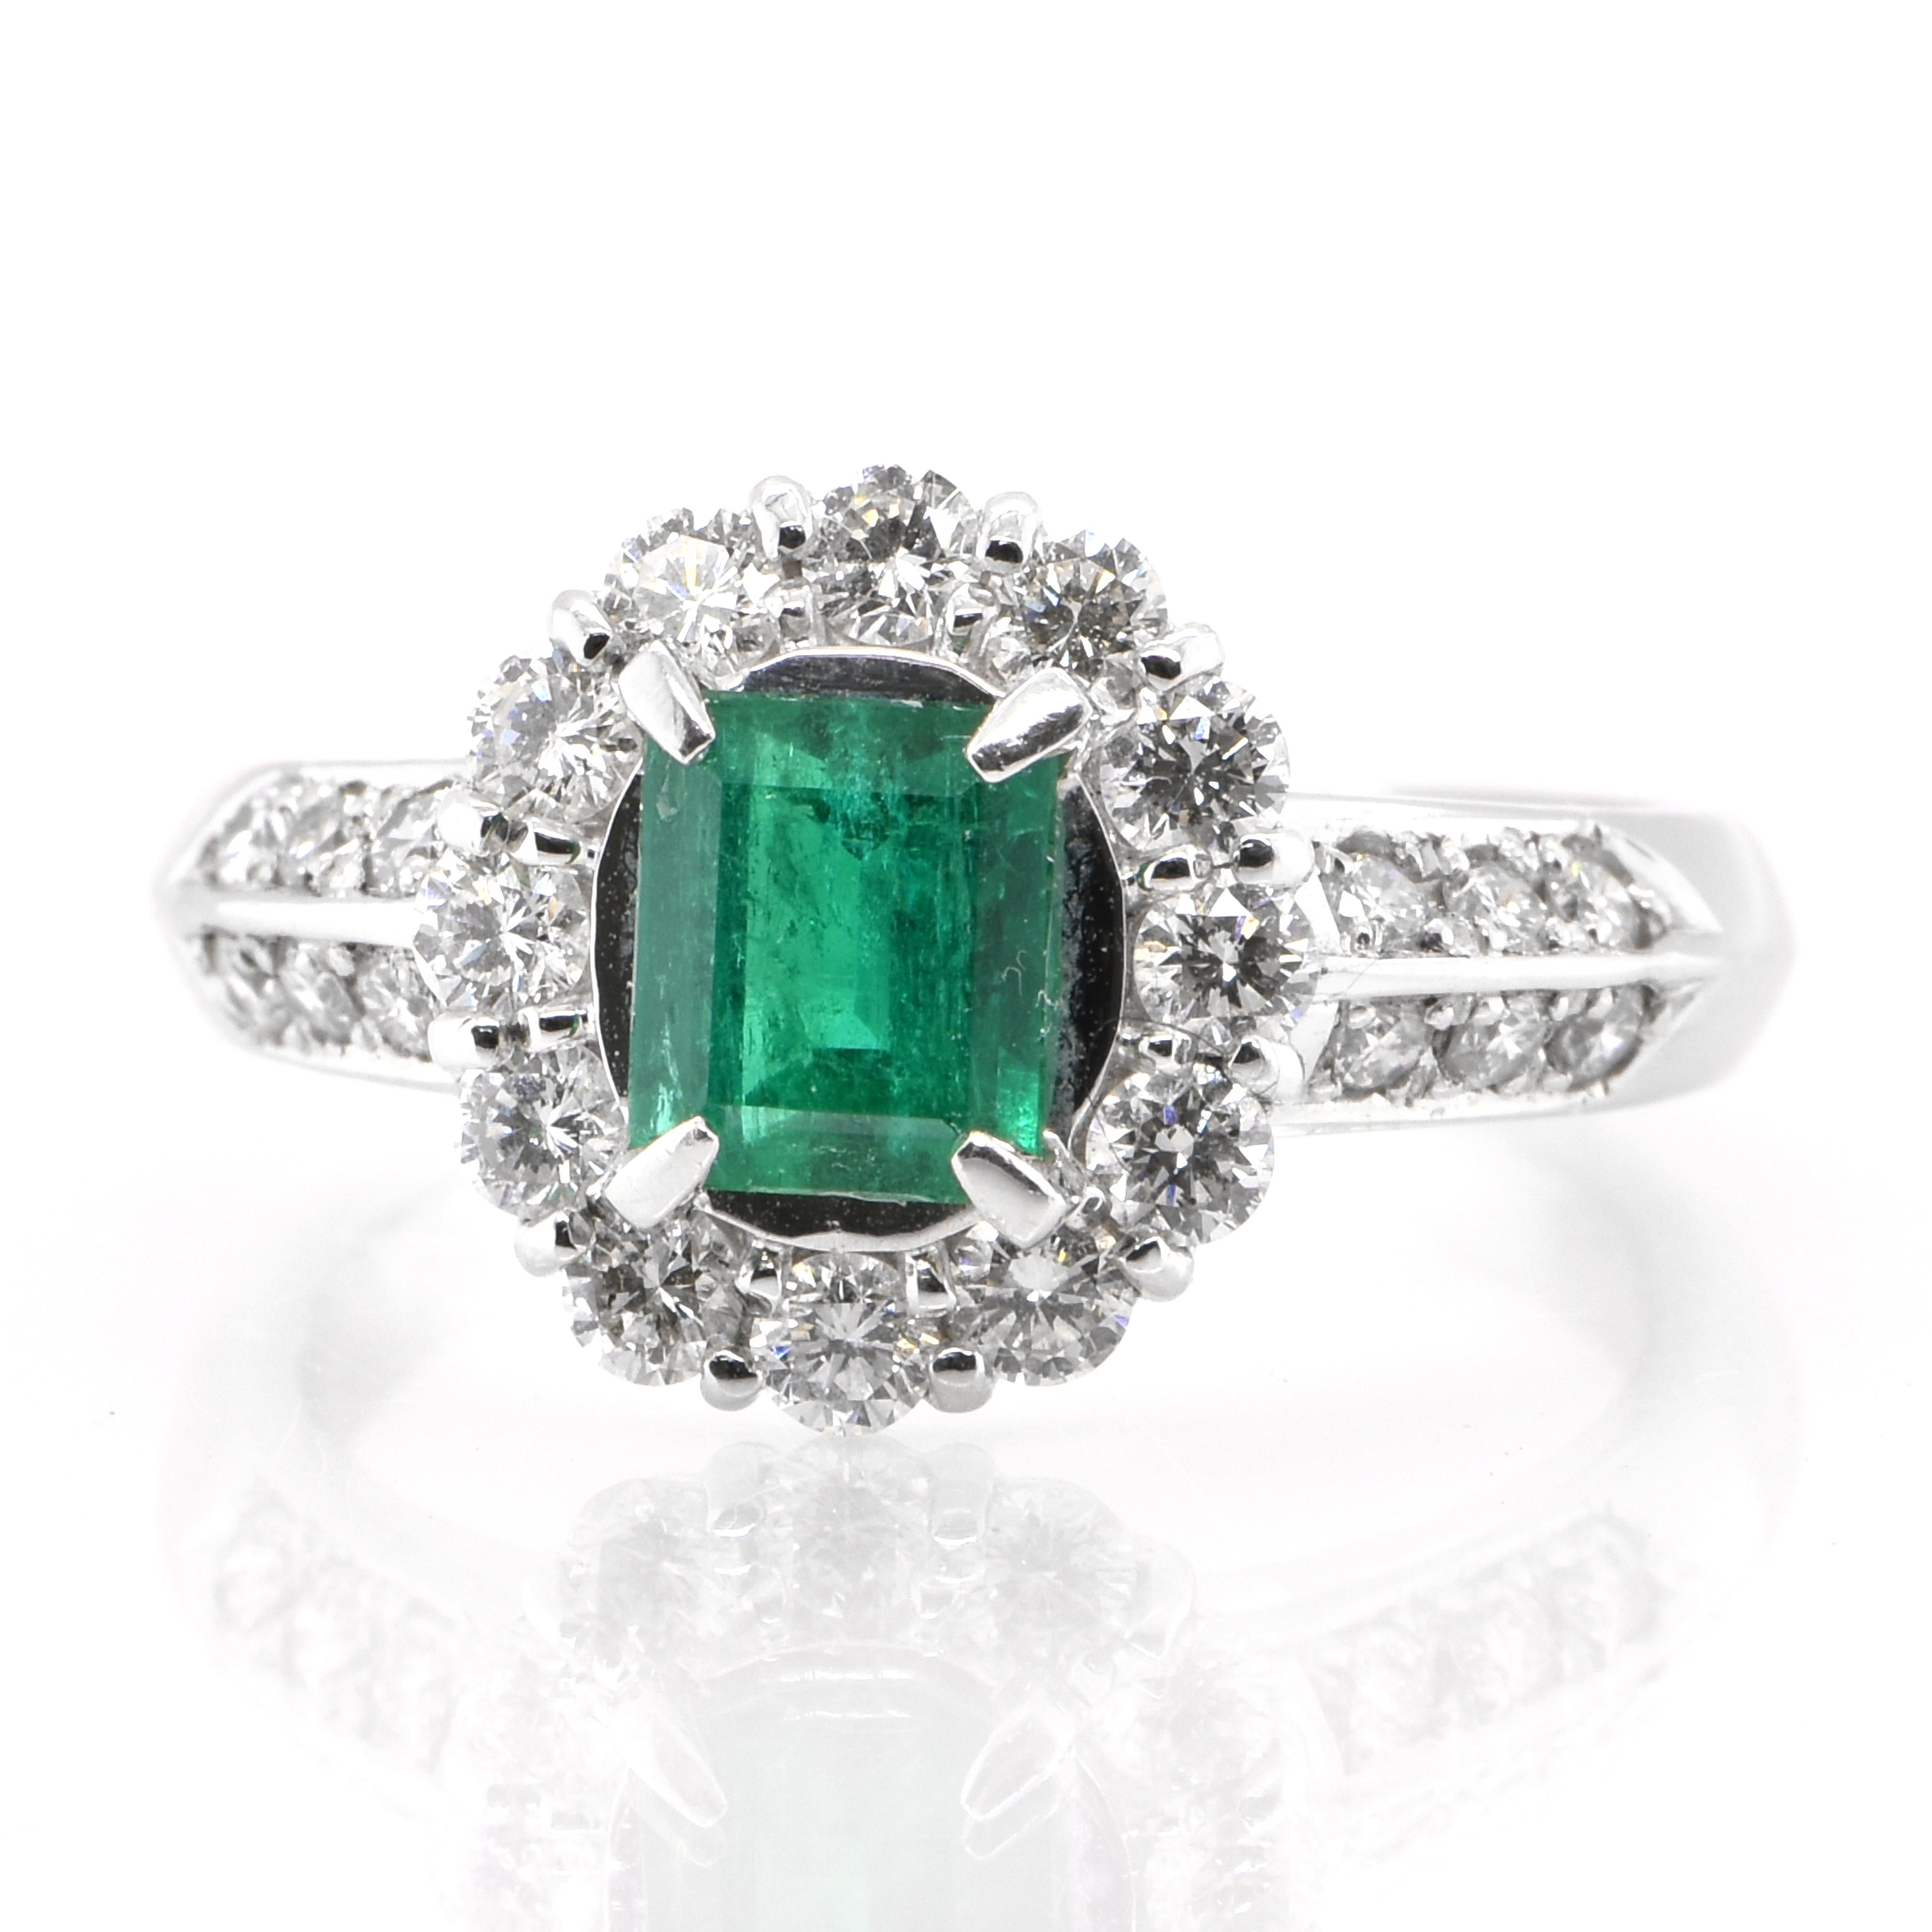 A stunning Engagement Ring featuring a 0.69 Carat Natural Emerald and 0.73 Carats of Diamond Accents set in Platinum. People have admired emerald’s green for thousands of years. Emeralds have always been associated with the lushest landscapes and